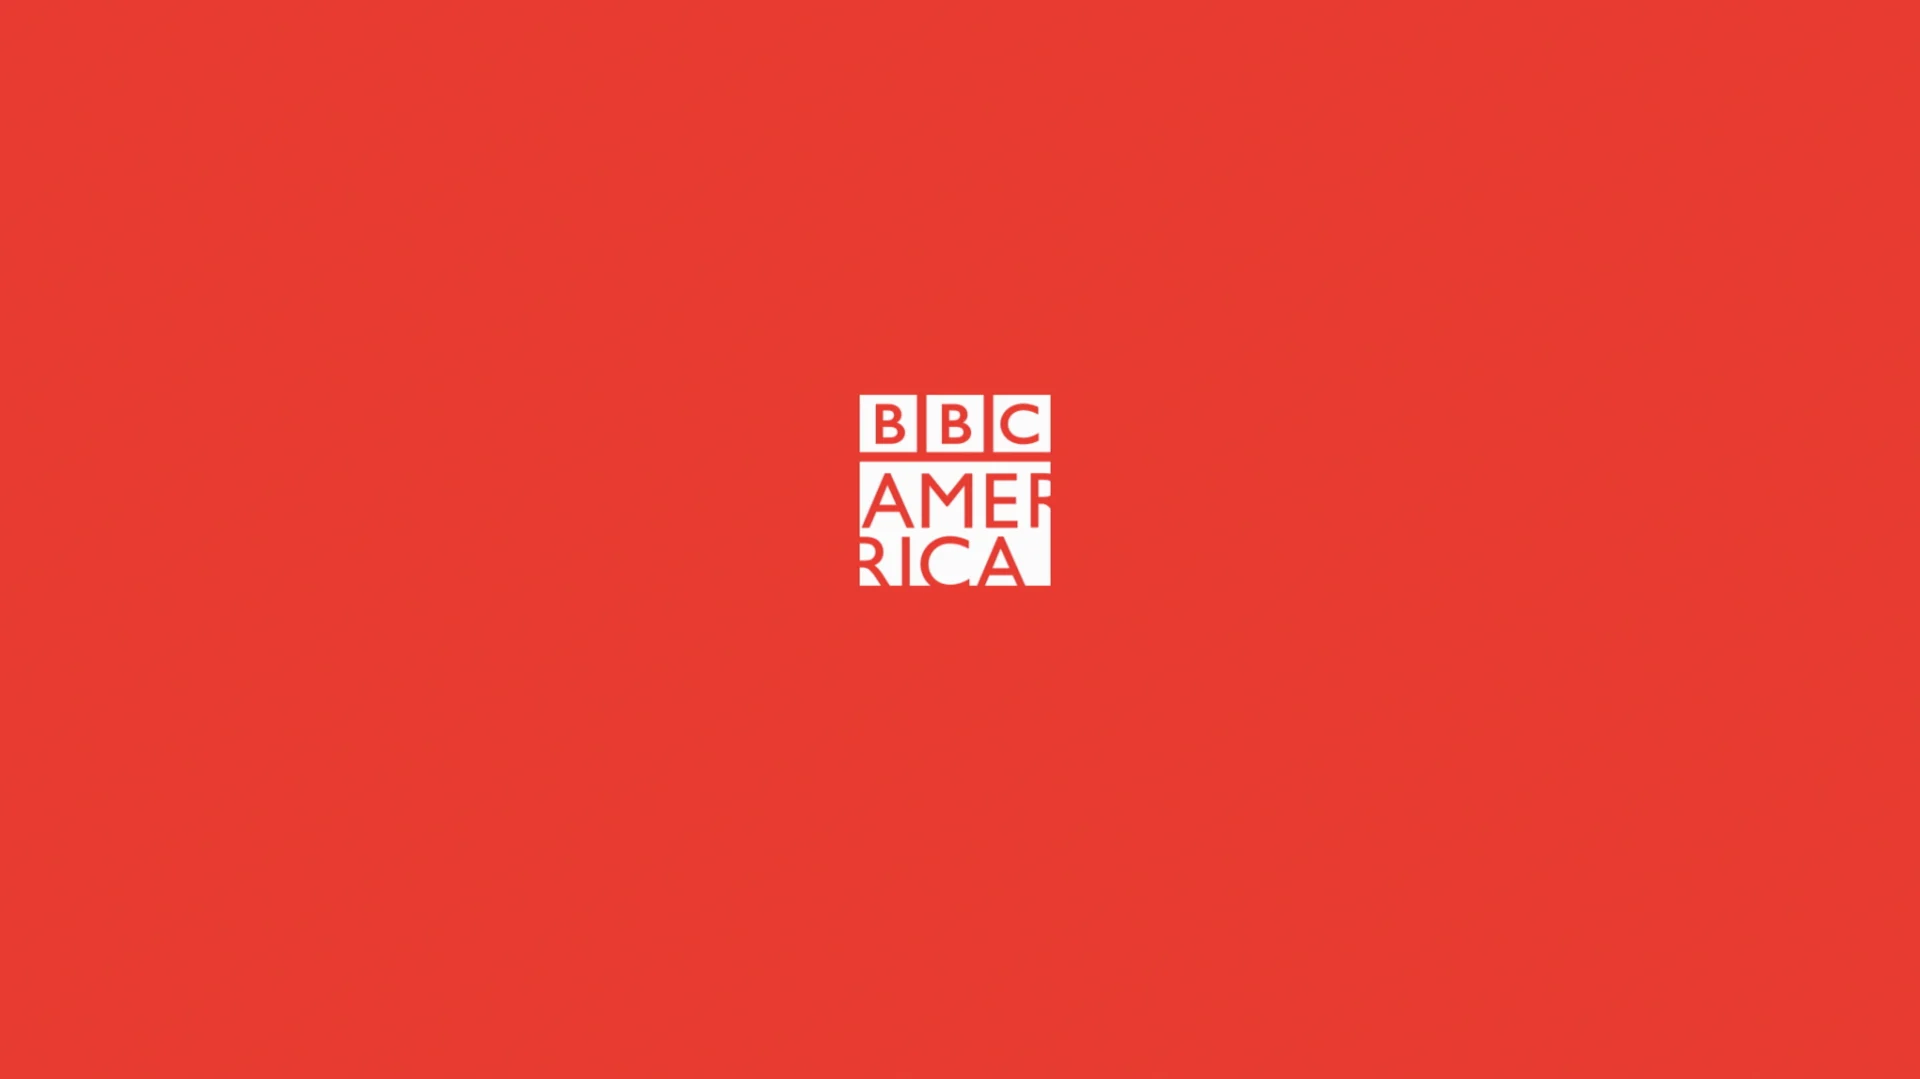 What do you get when you take an iconic legacy brand ready for an update and a desire to infuse a healthy dose of levity? A BBC America brand refresh that is eye-catching, versatile, and just the right amount cheeky, or you might say, Brit-ish.